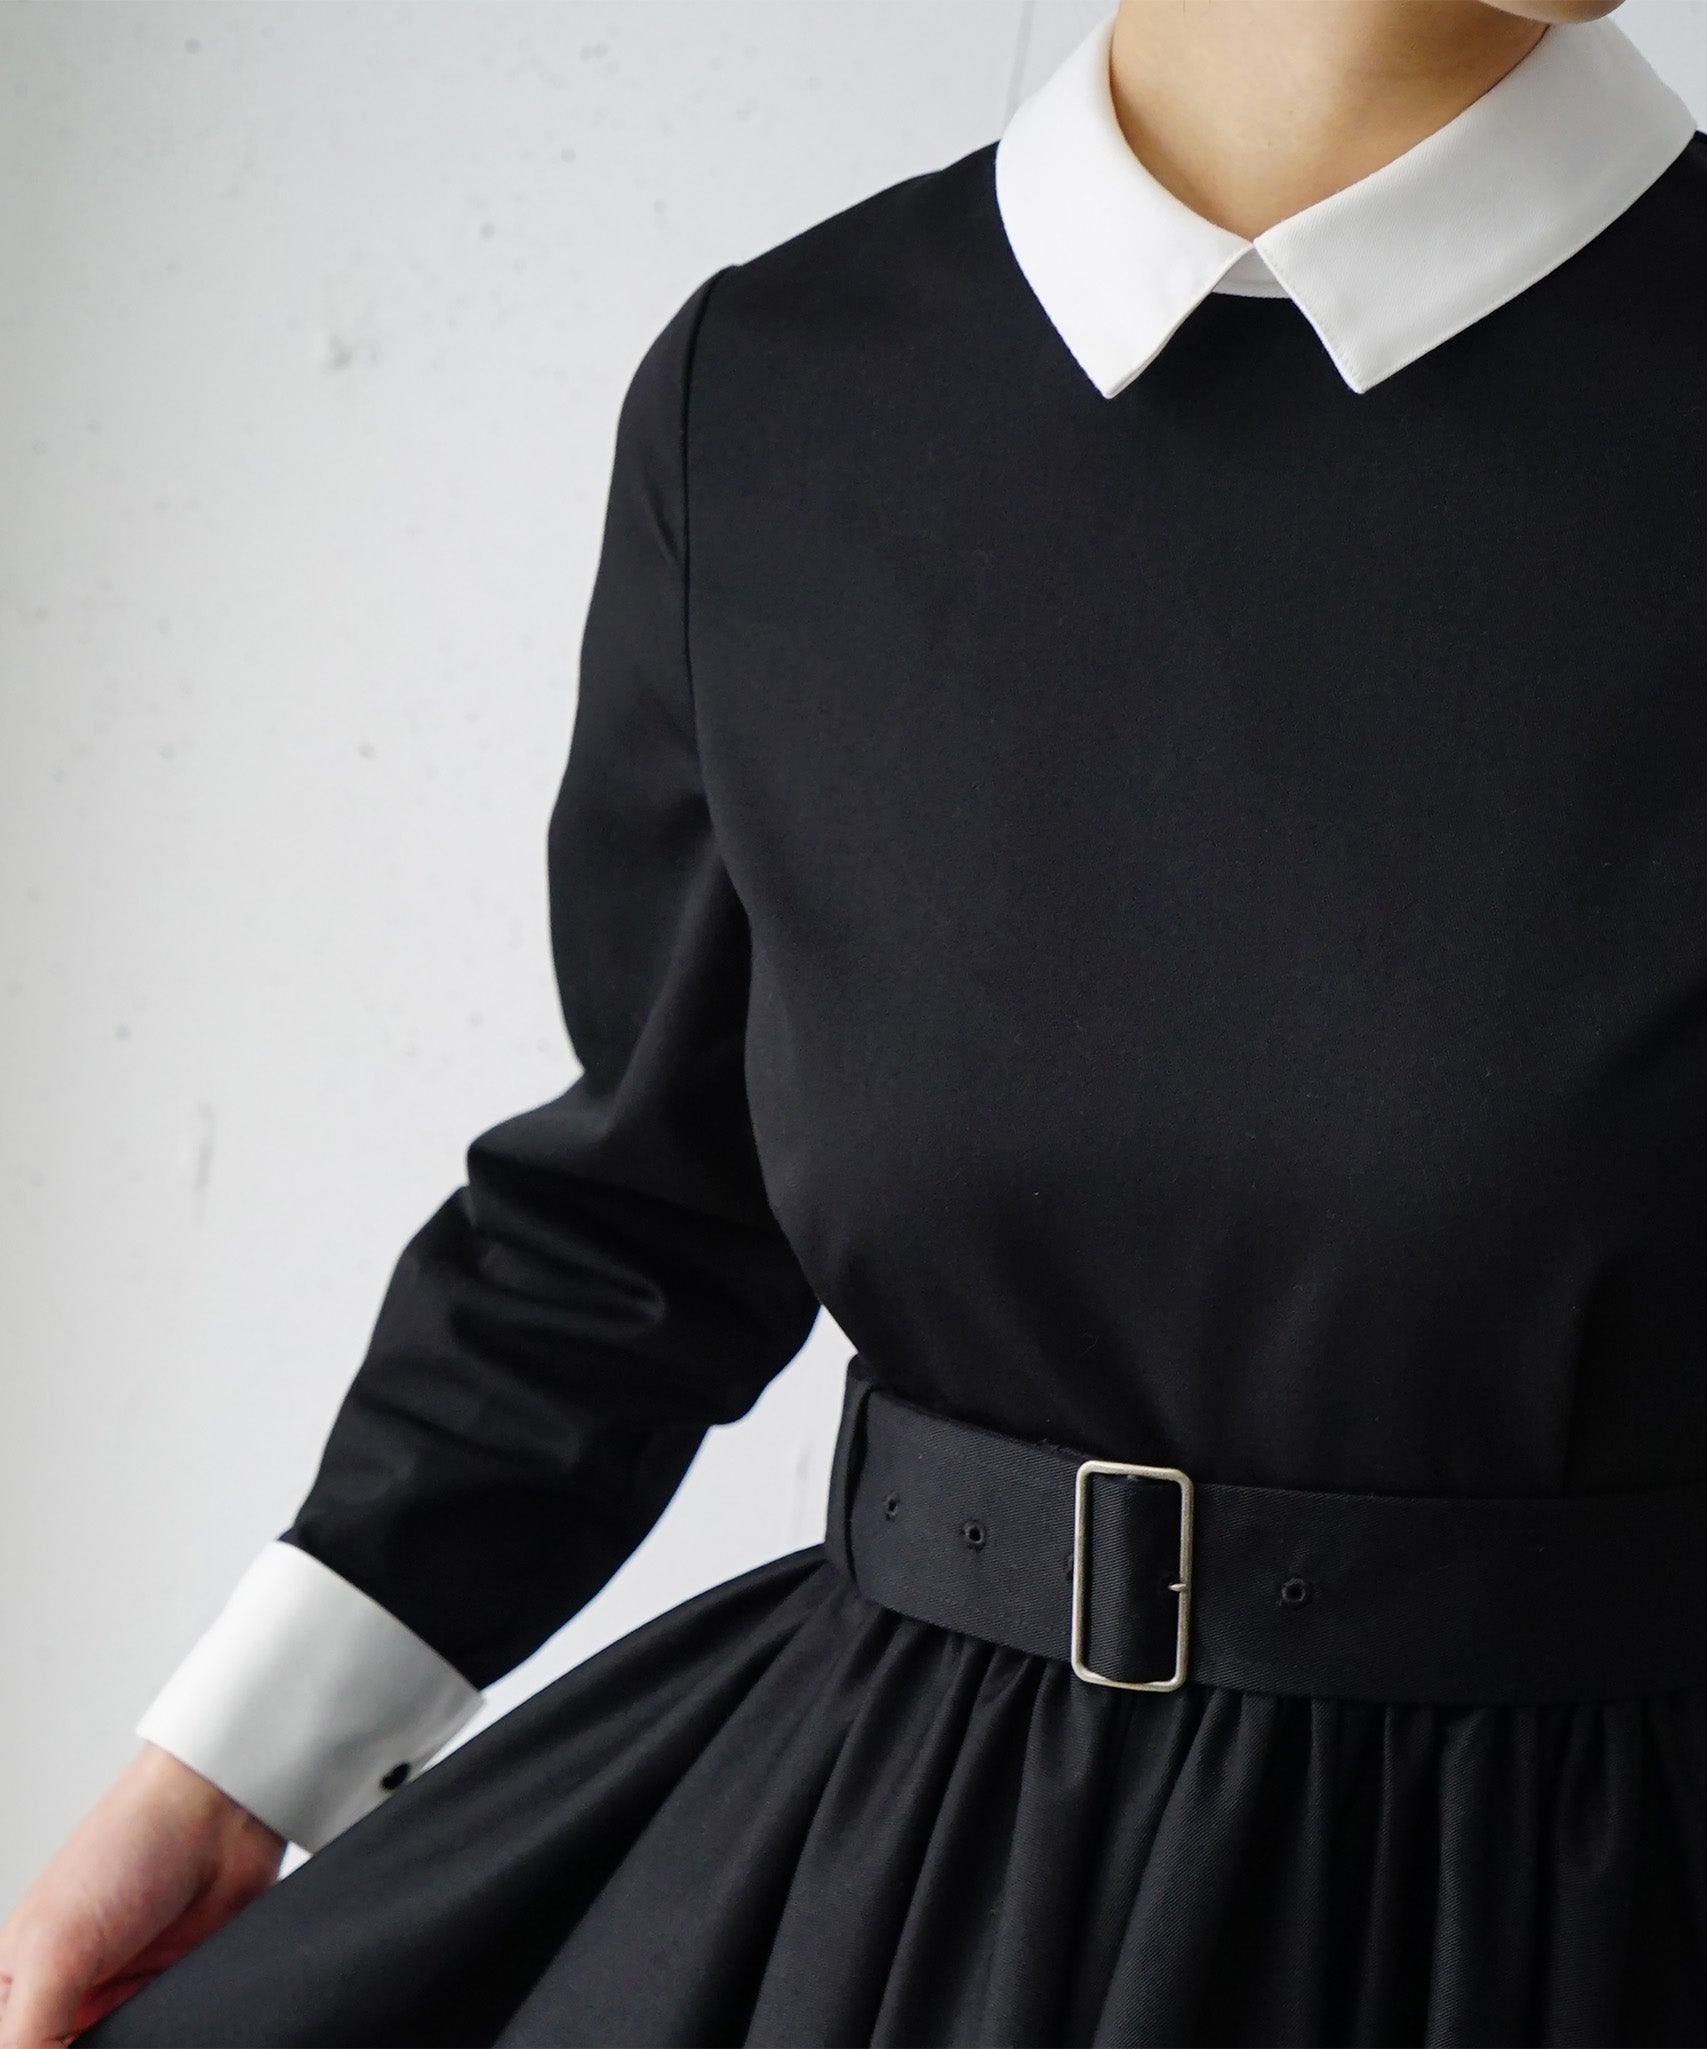 foufou / フーフー | THE DRESS double cuffs bicolor one piece ...